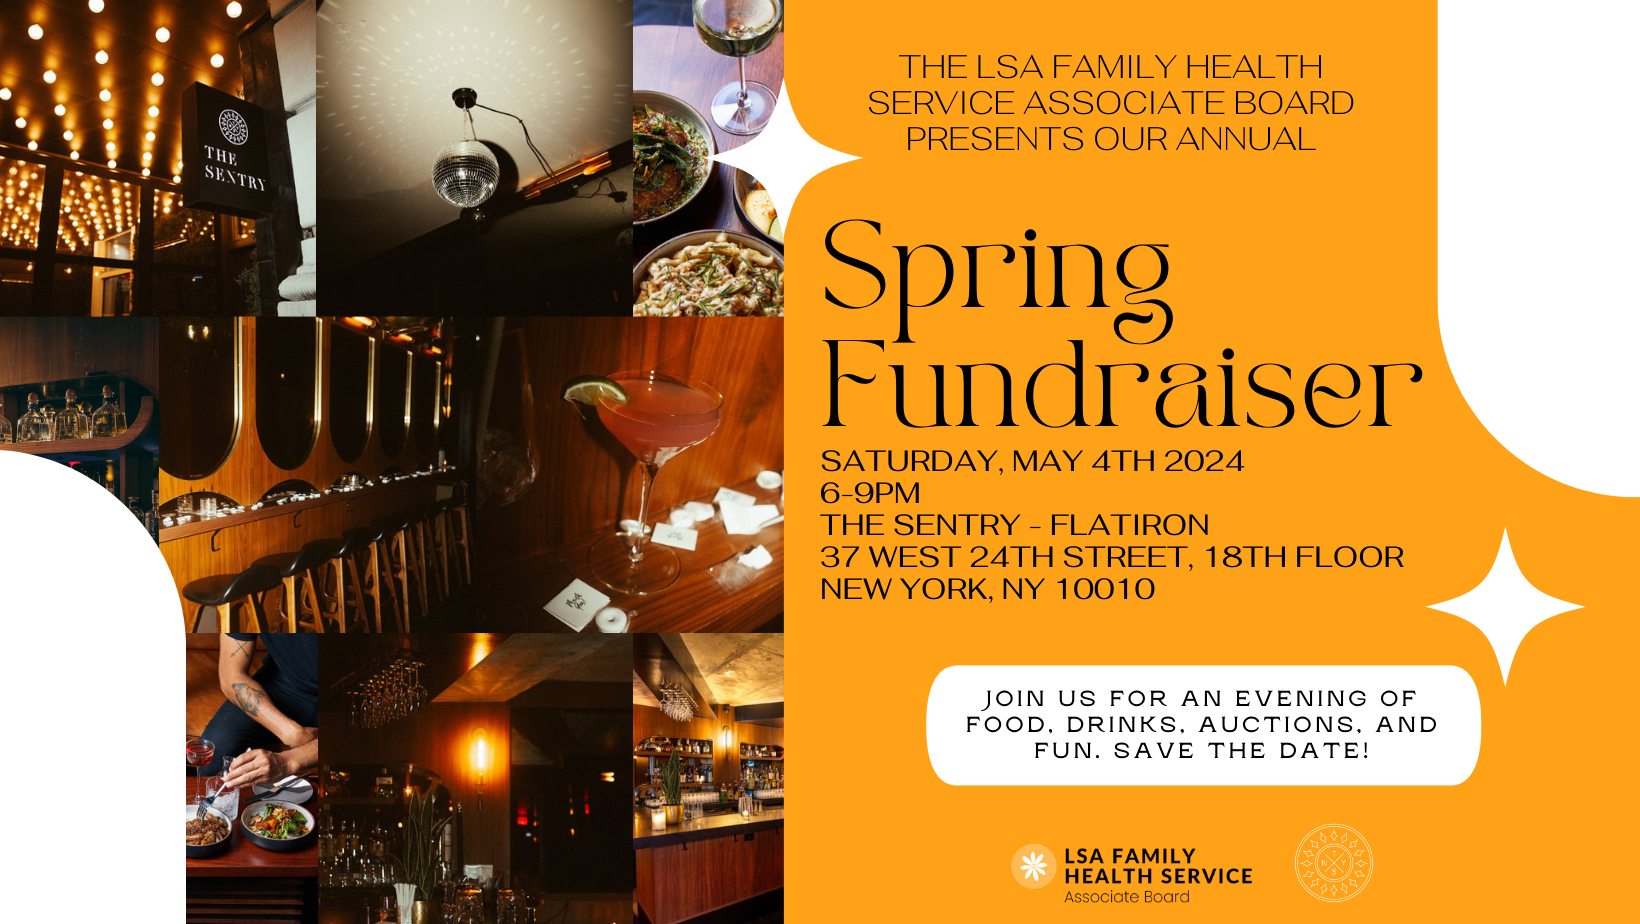 Save the Date! LSA Associate Board's Annual Spring Fundraiser - May 4th, 2024 6-9PM